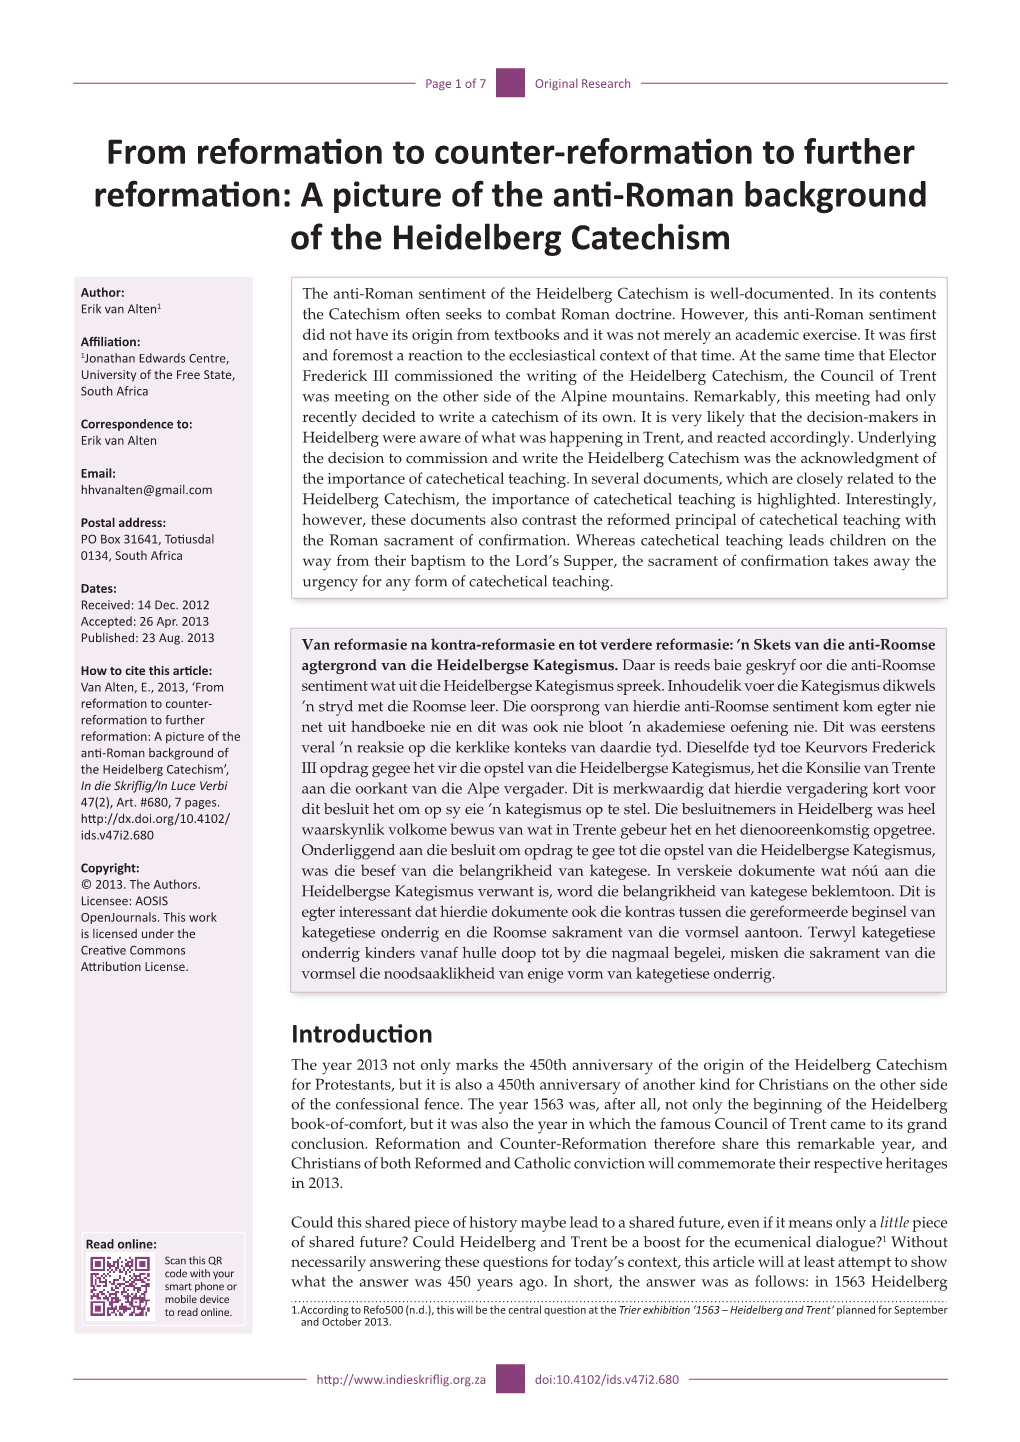 A Picture of the Anti-Roman Background of the Heidelberg Catechism